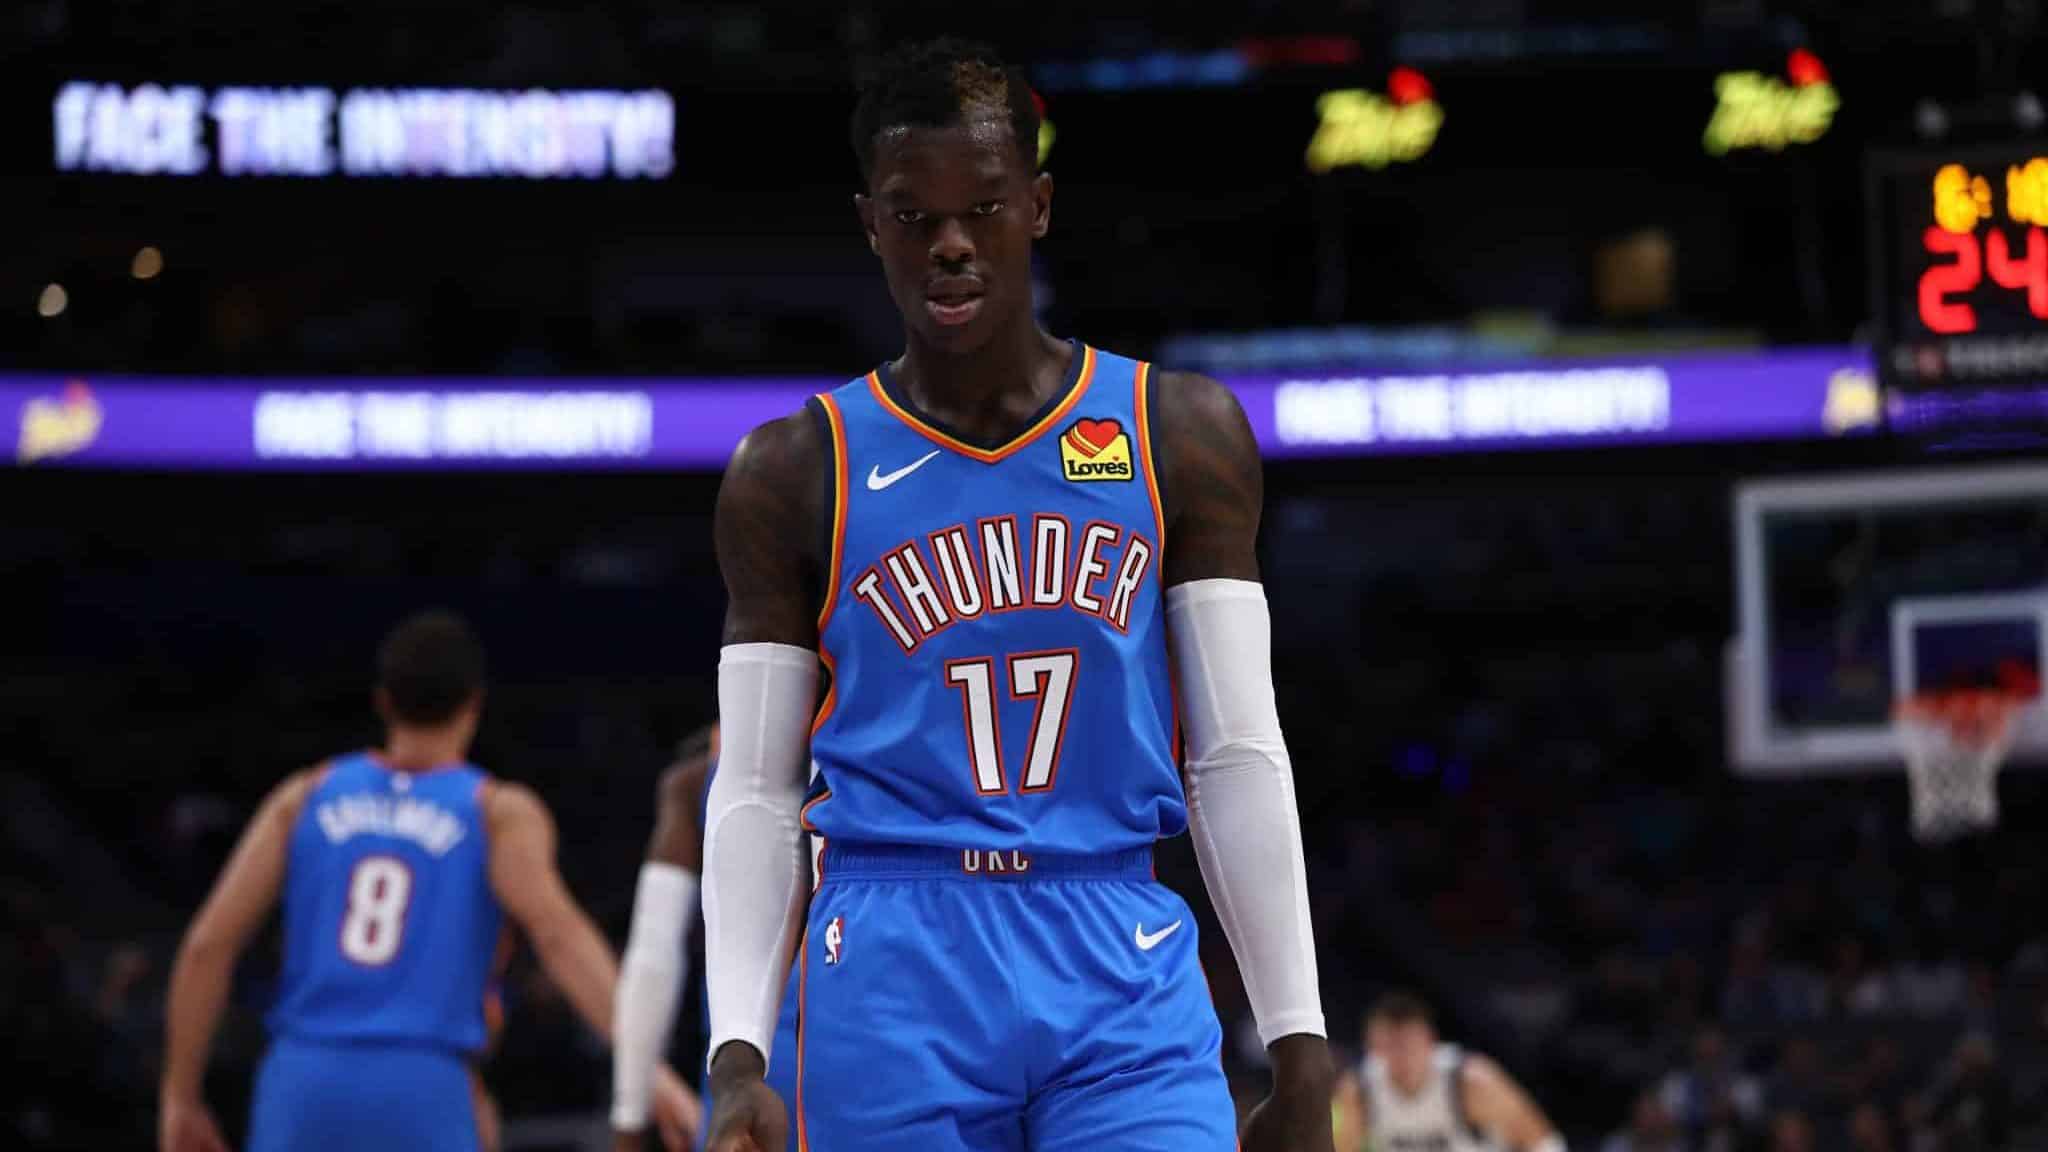 DALLAS, TEXAS - OCTOBER 14: Dennis Schroder #17 of the Oklahoma City Thunder during a preseason game at American Airlines Center on October 14, 2019 in Dallas, Texas.